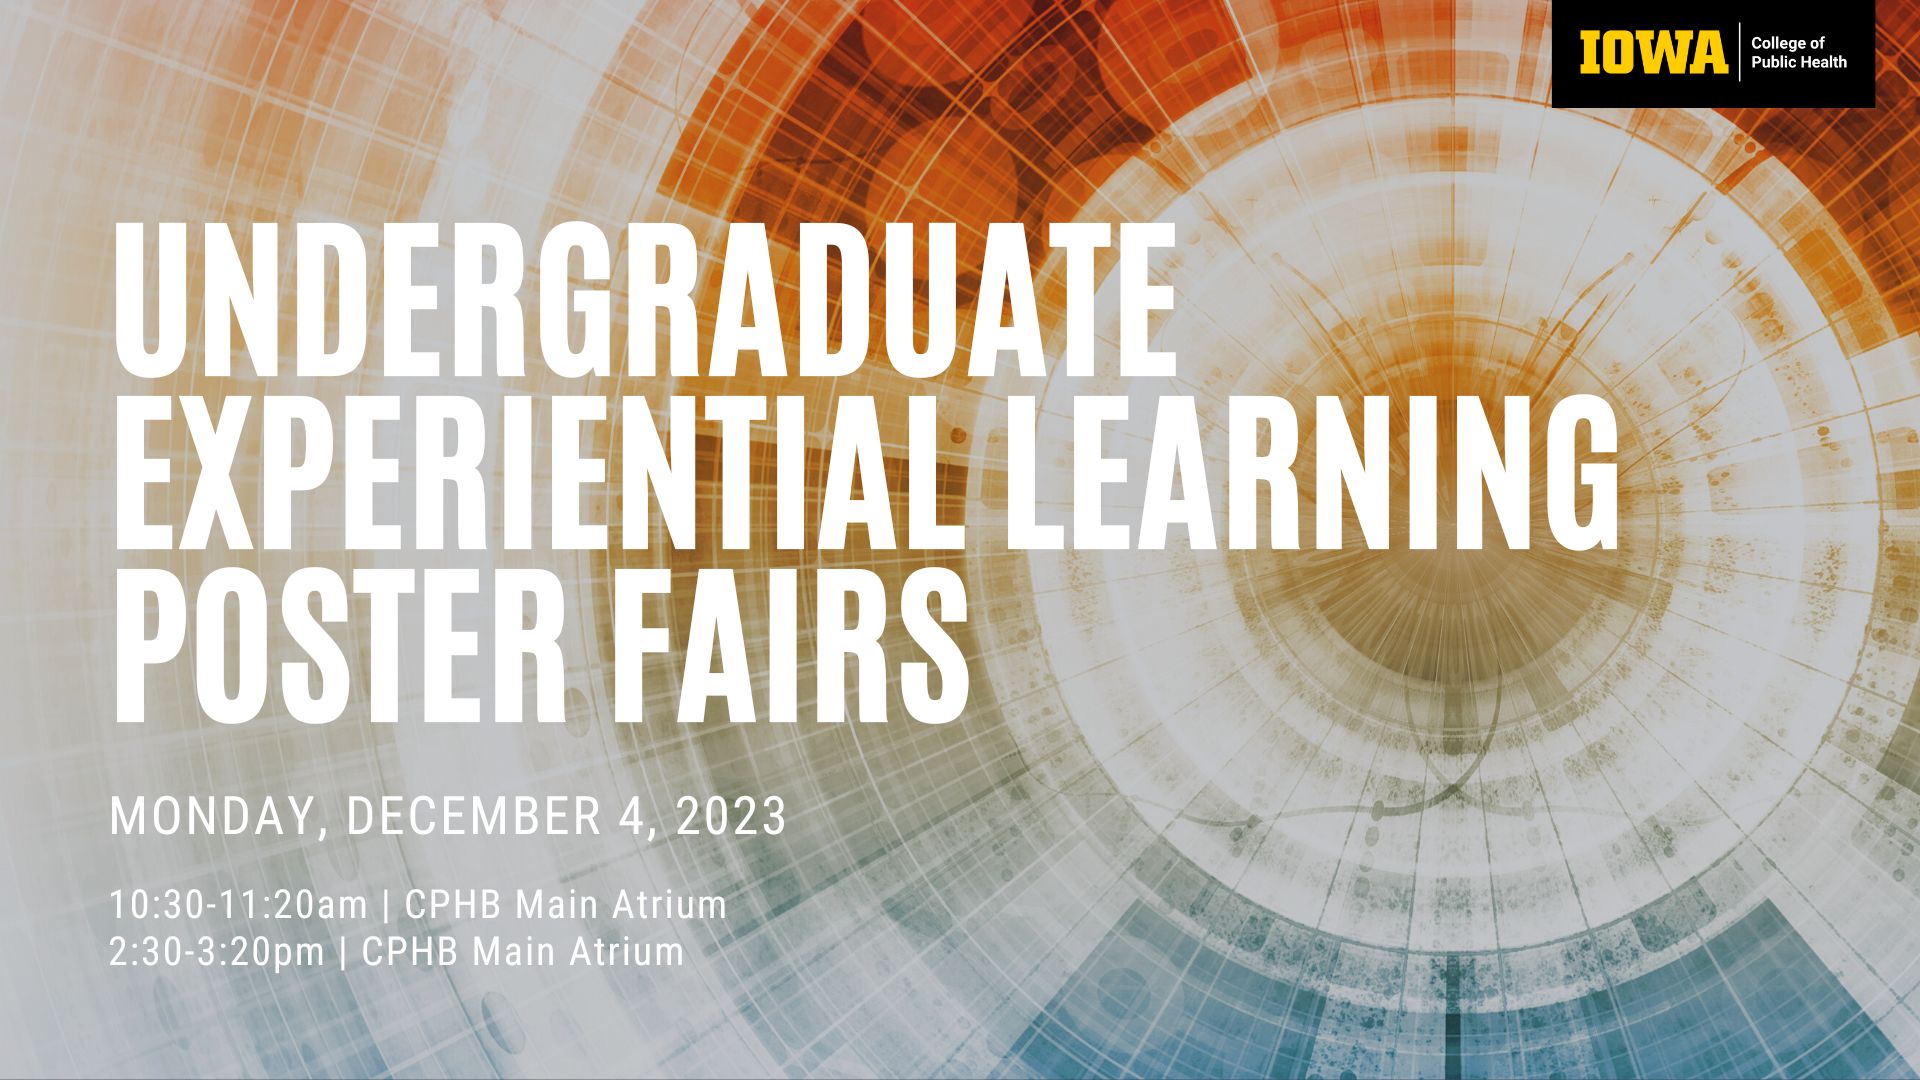 Undergraduate Experiential Learning Poster Fair, Monday December 4 2023